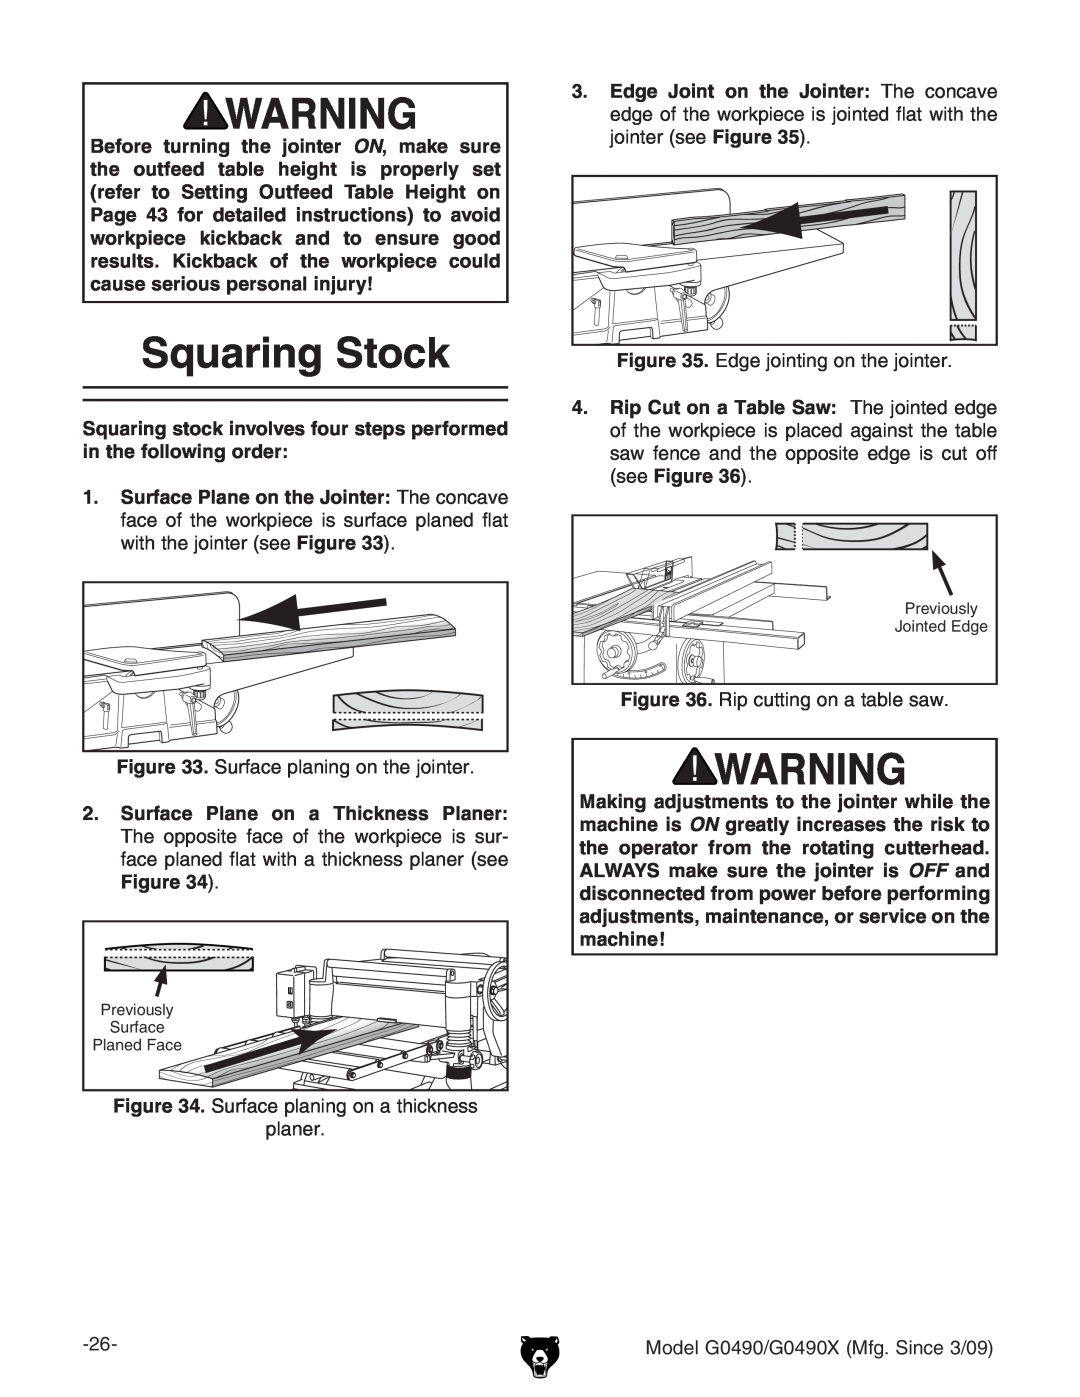 Grizzly G0490 owner manual Squaring Stock, Squaring stock involves four steps performed in the following order, #, eaVcZg# 